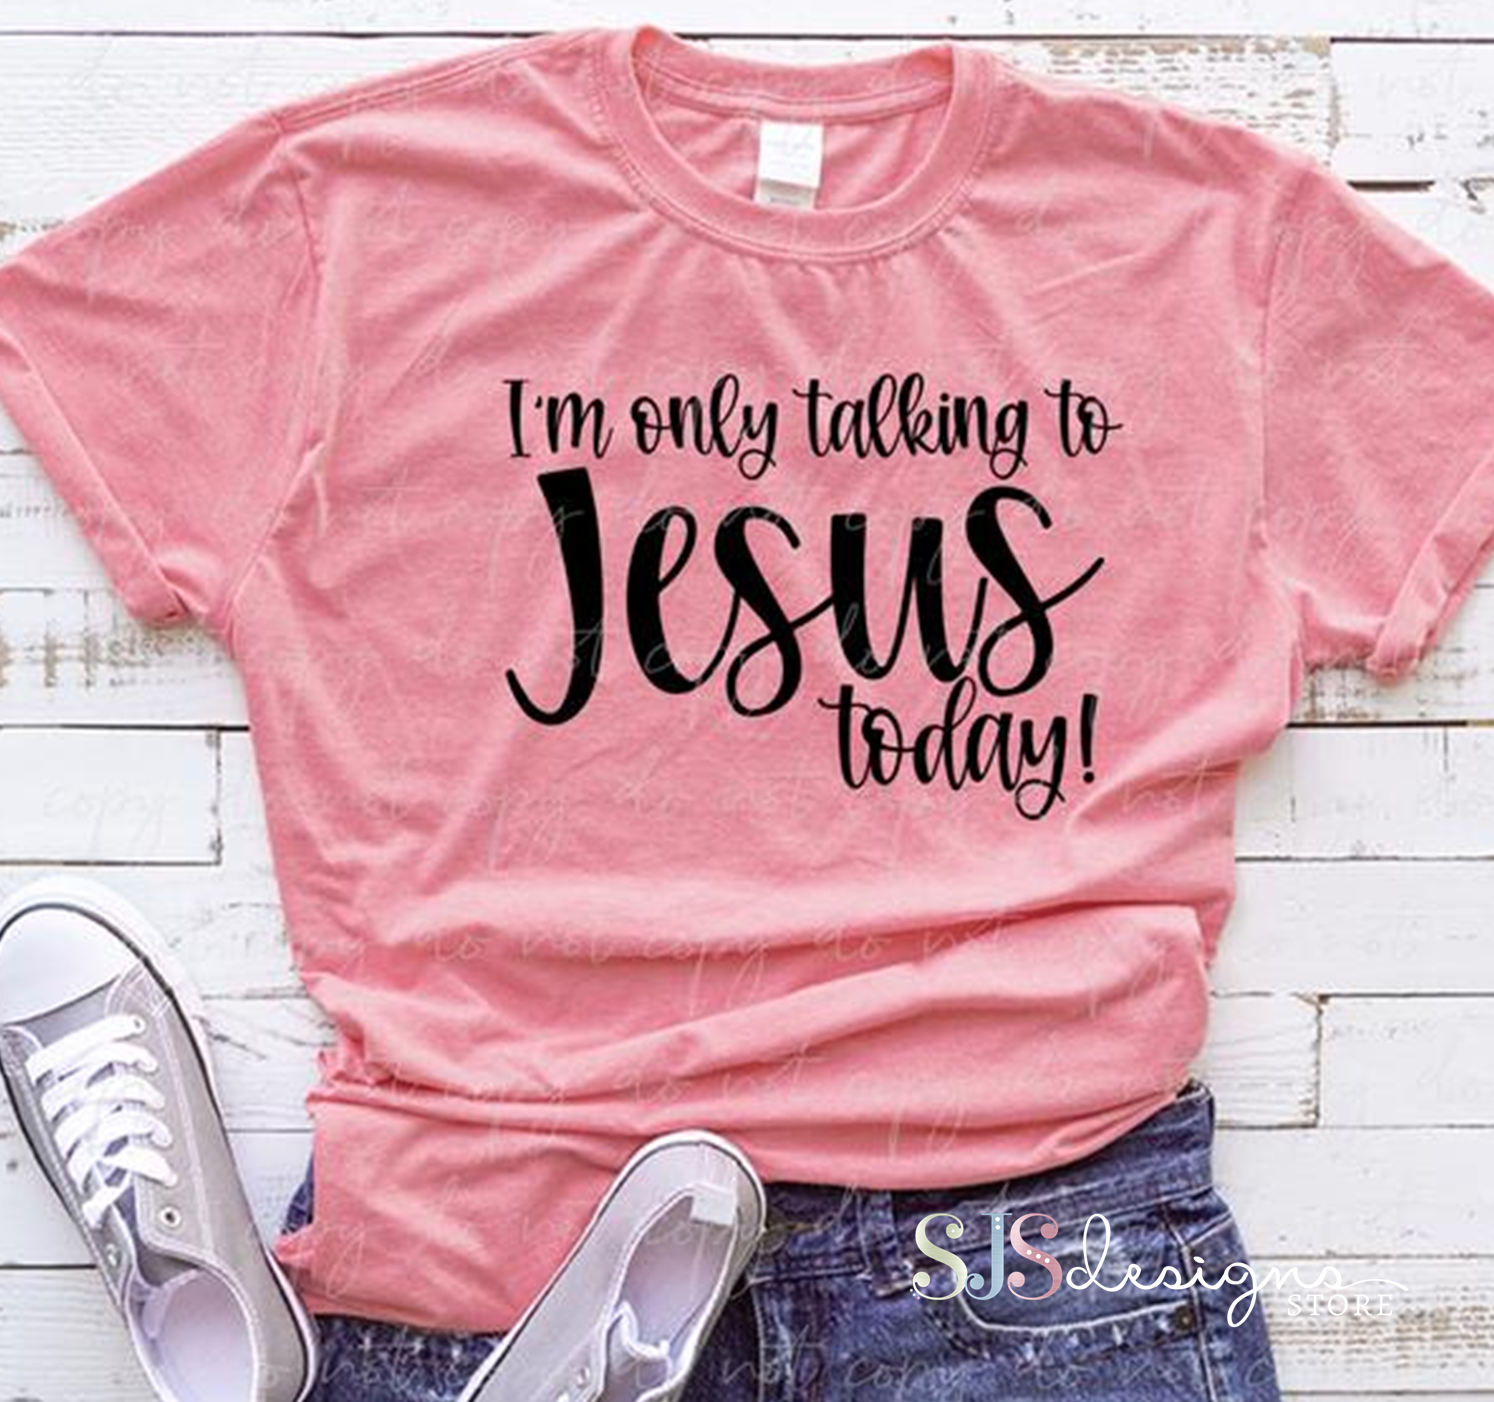 I'm Only Talking to Jesus Today-1 Shirt